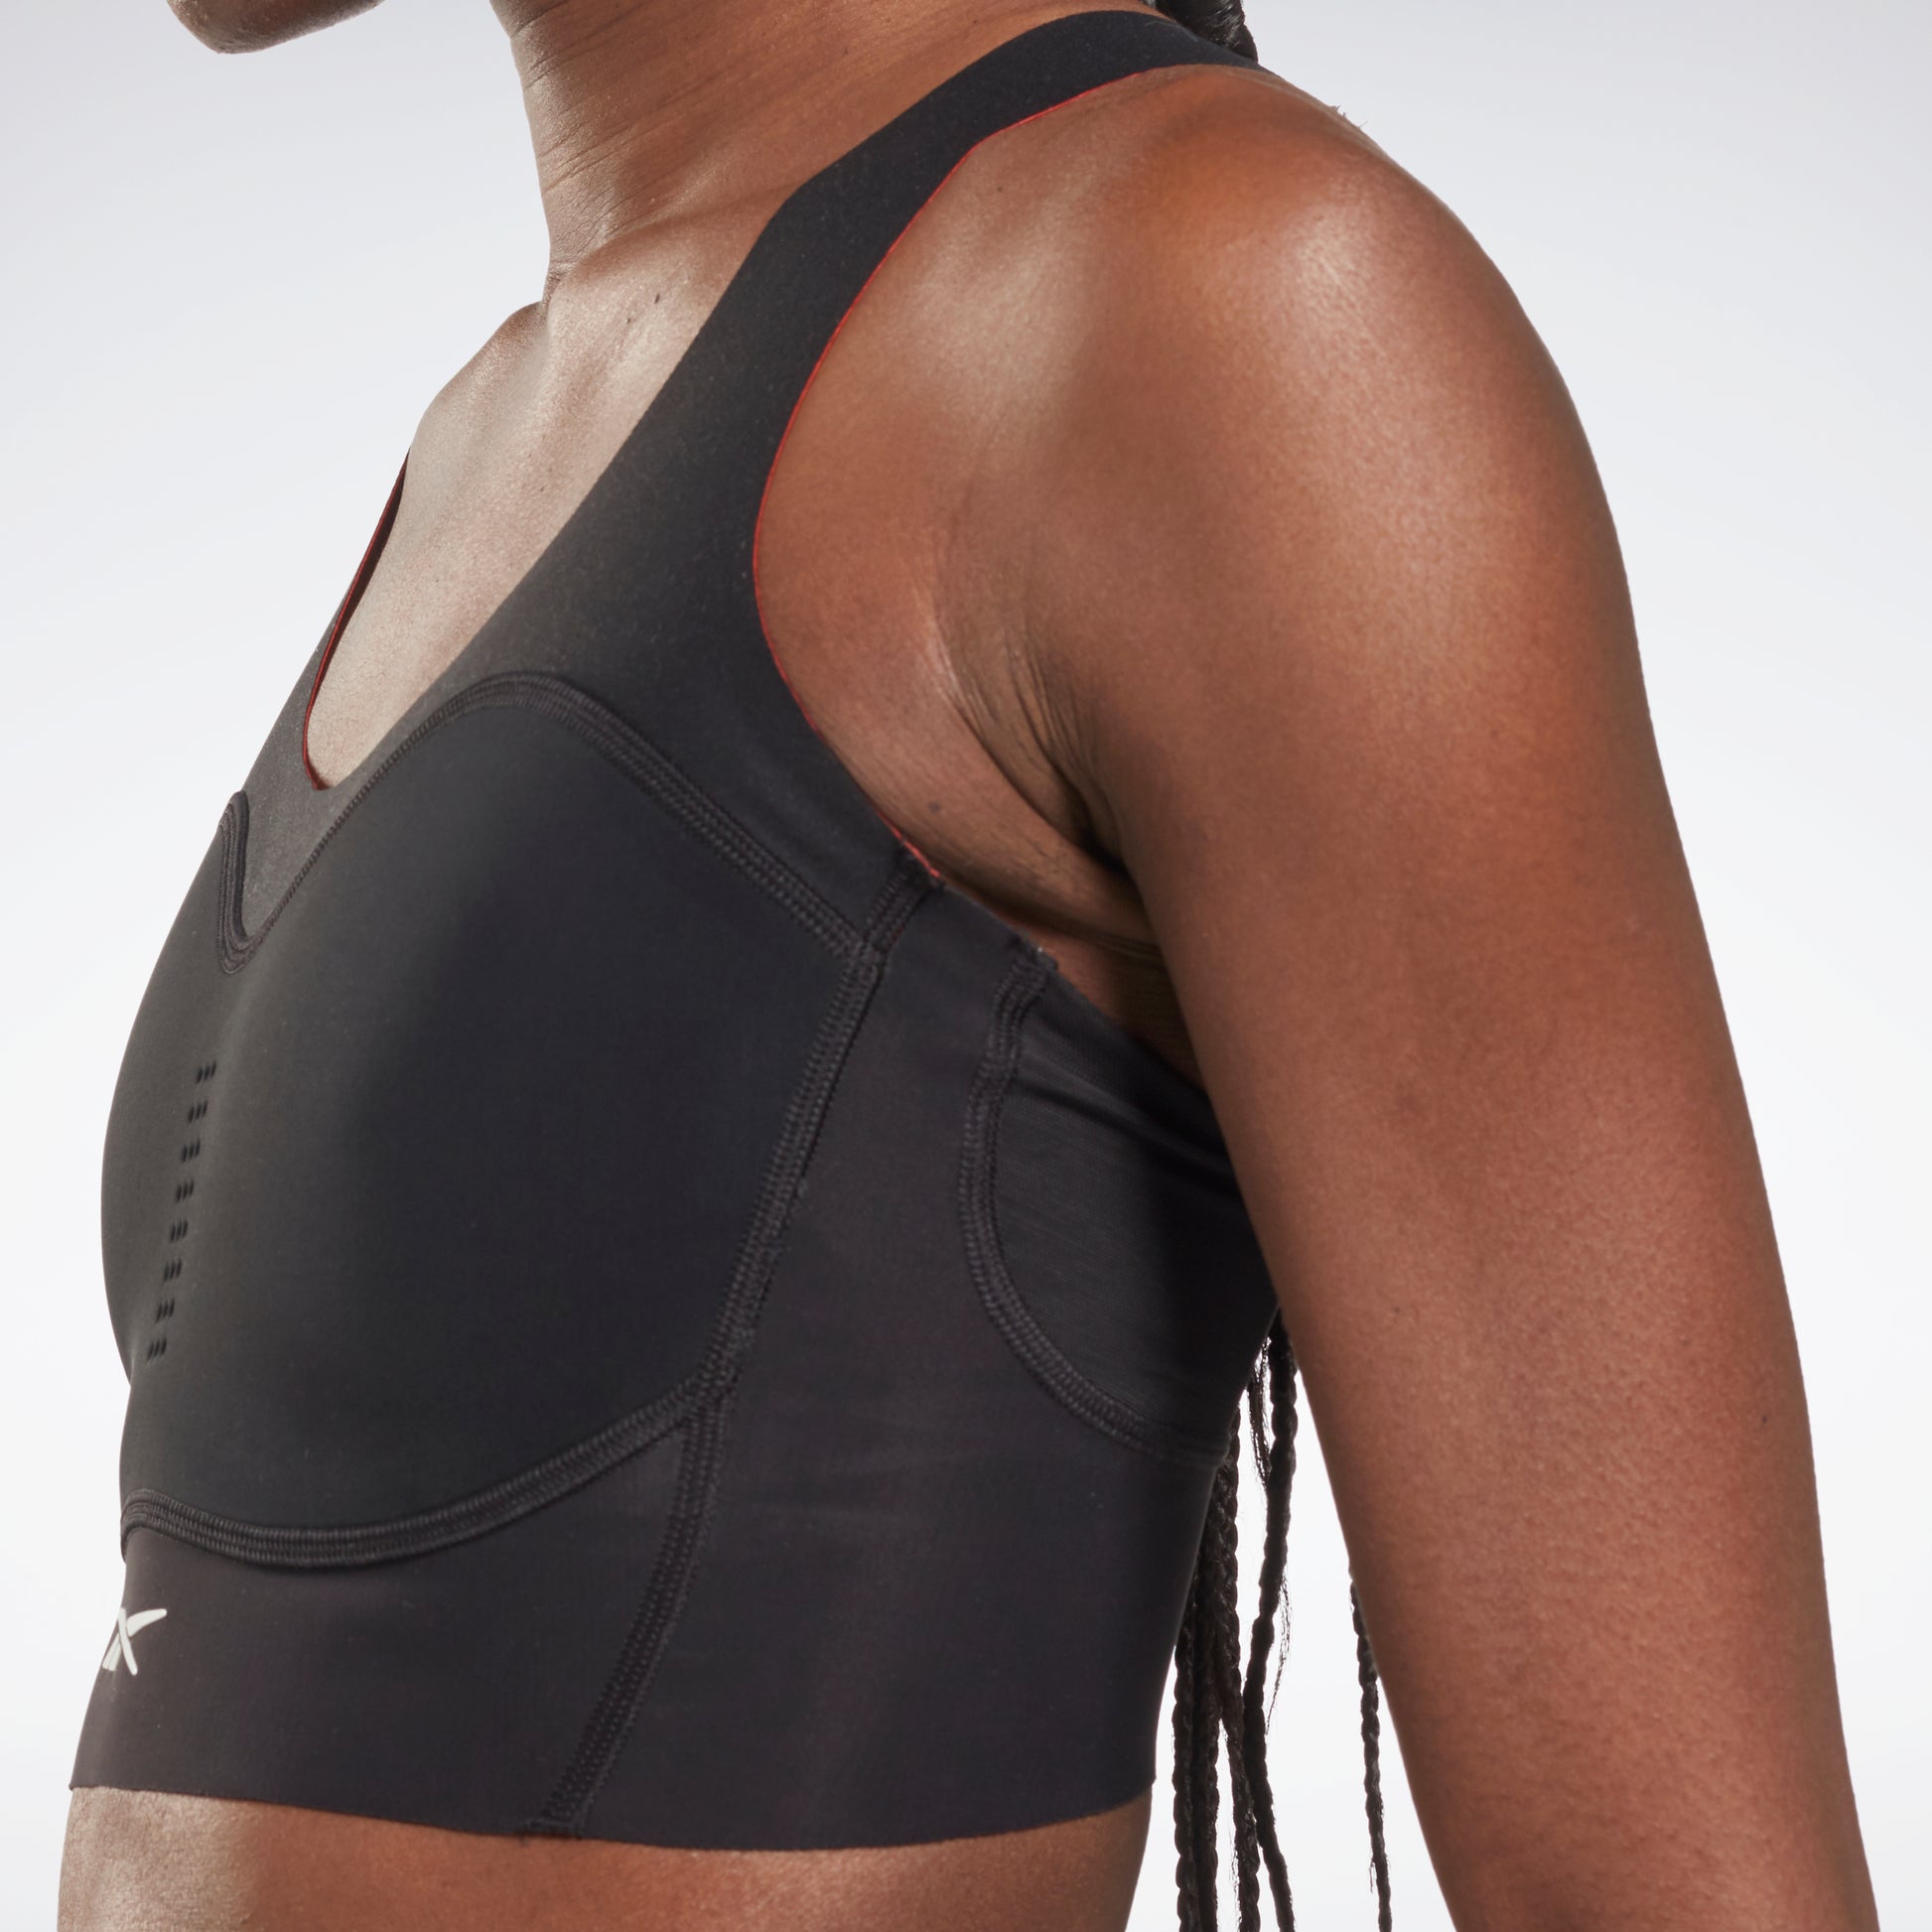 Reebok PureMove Sports Bra Review: Finally, a Bra That Holds up